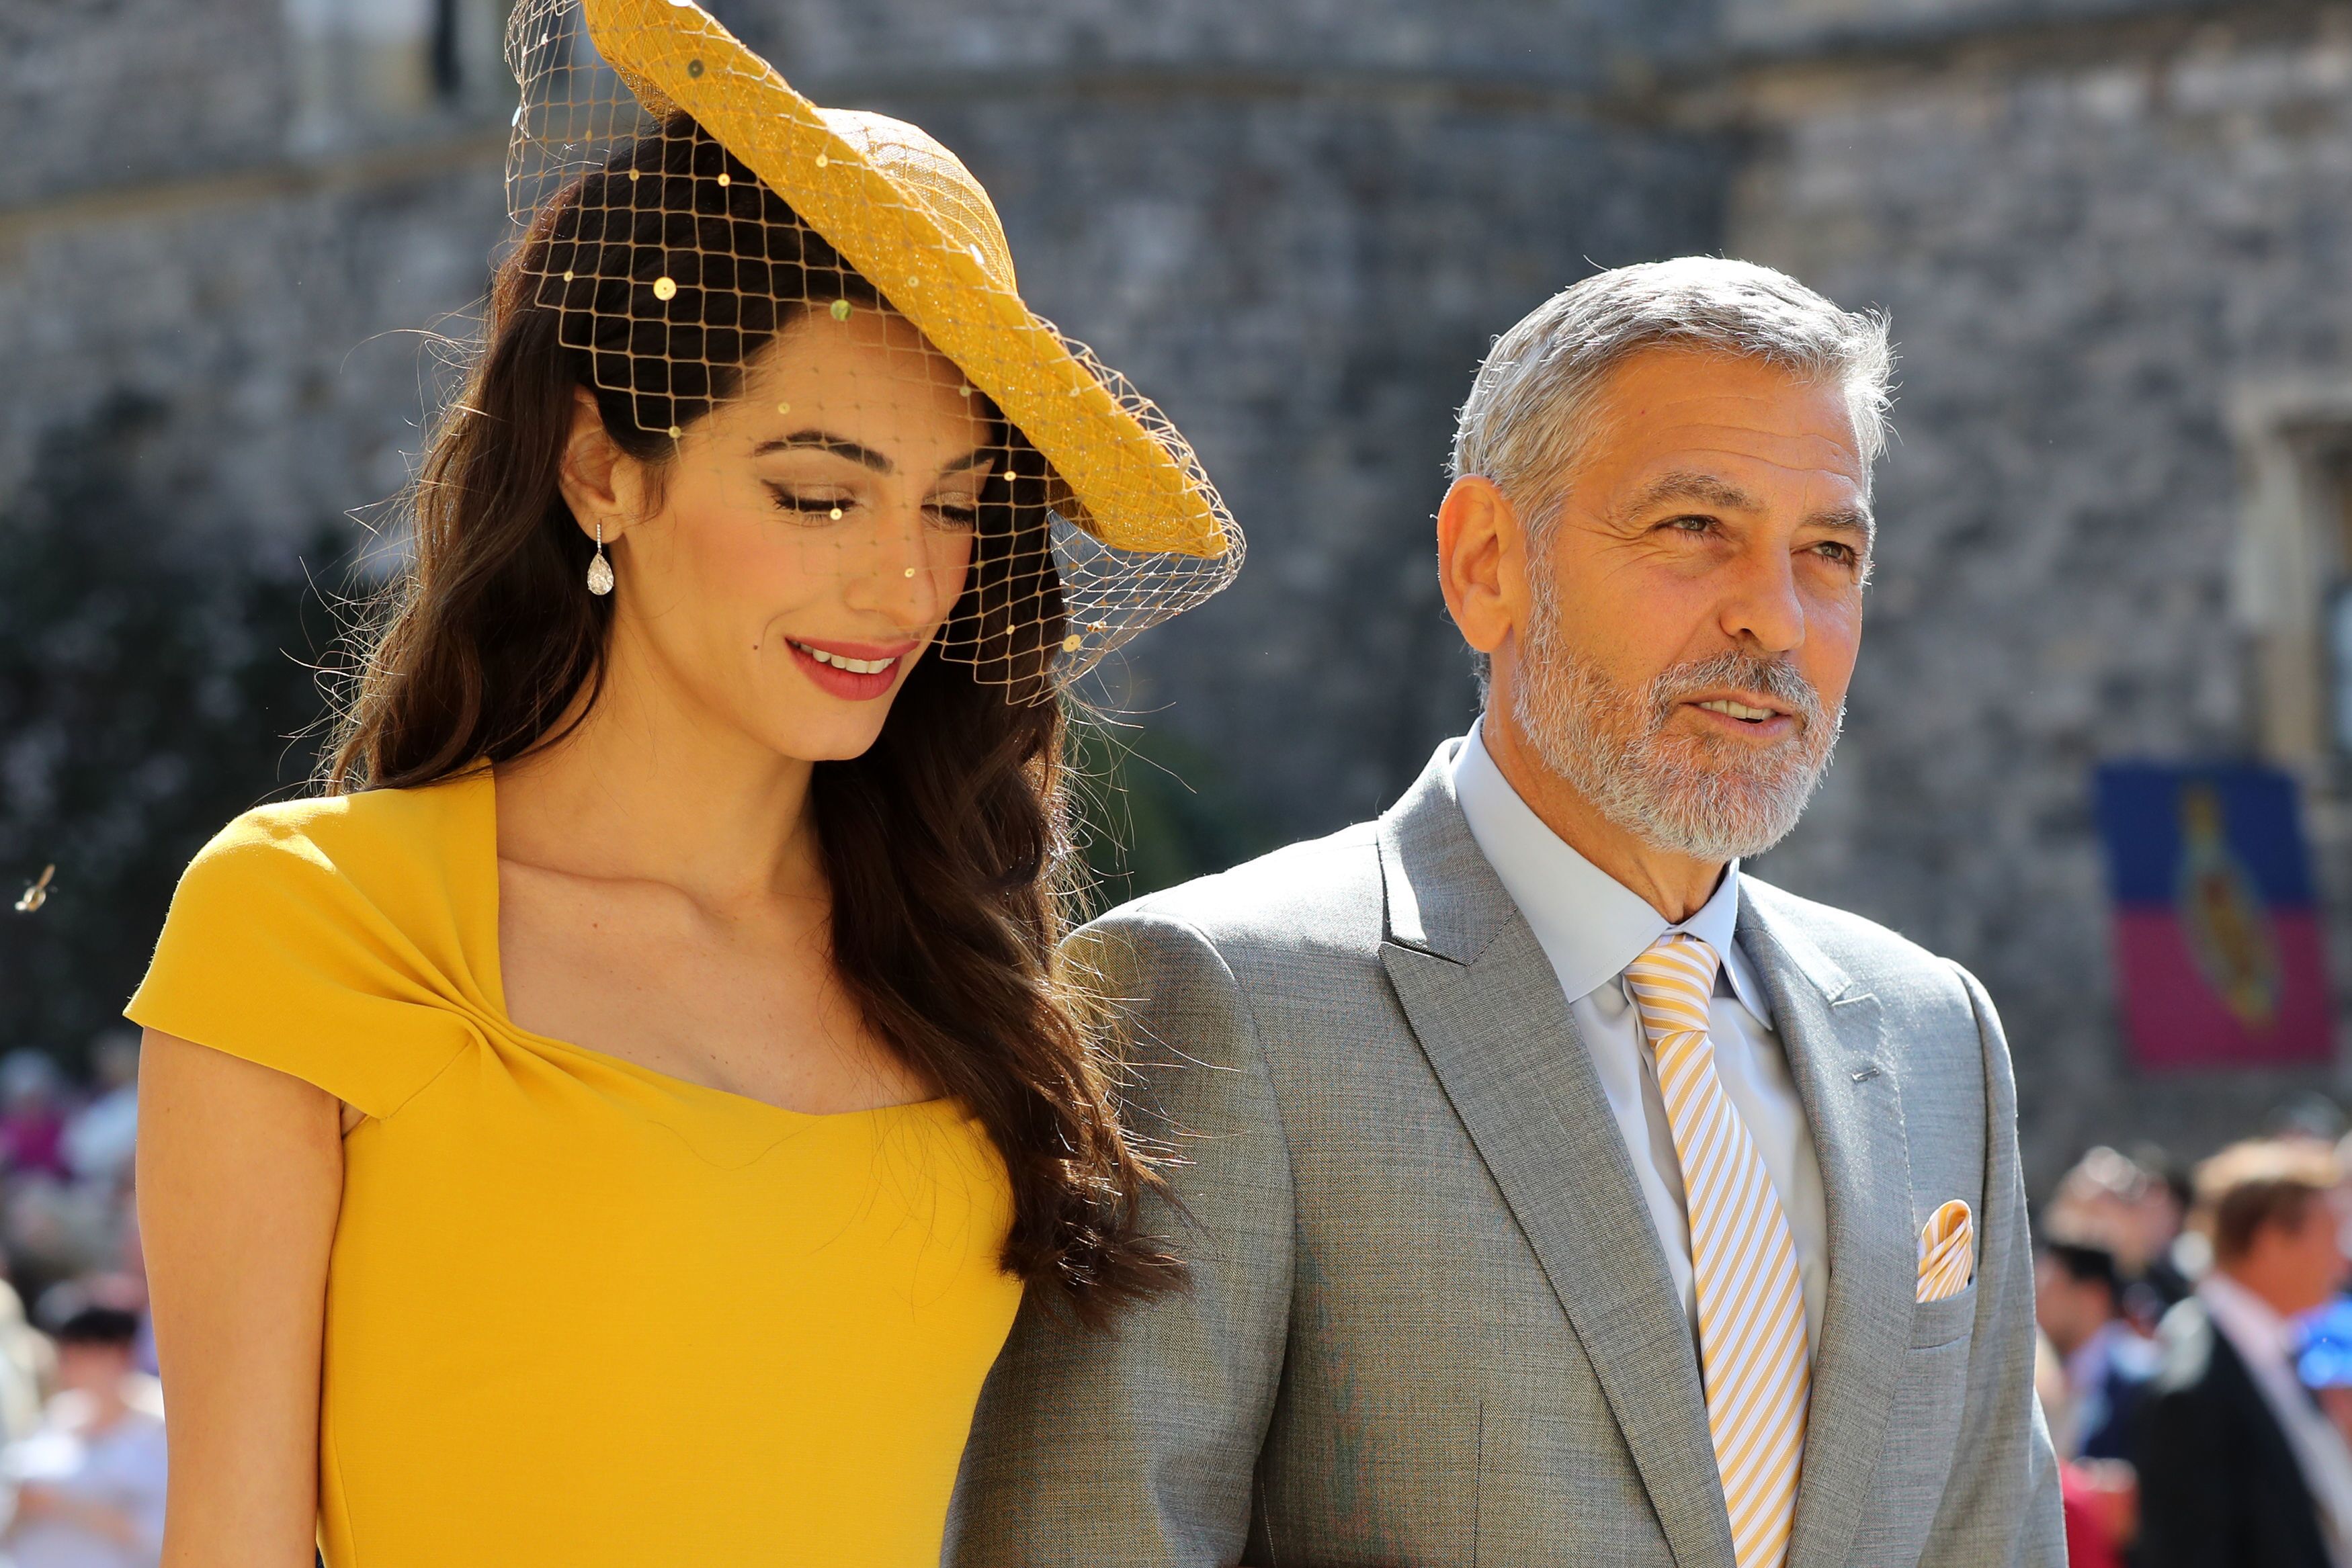 Amal and George Clooney arrive at St George's Chapel at Windsor Castle for the wedding of Prince Harry to Meghan Markle on May 19, 2018 | Source: Getty Images